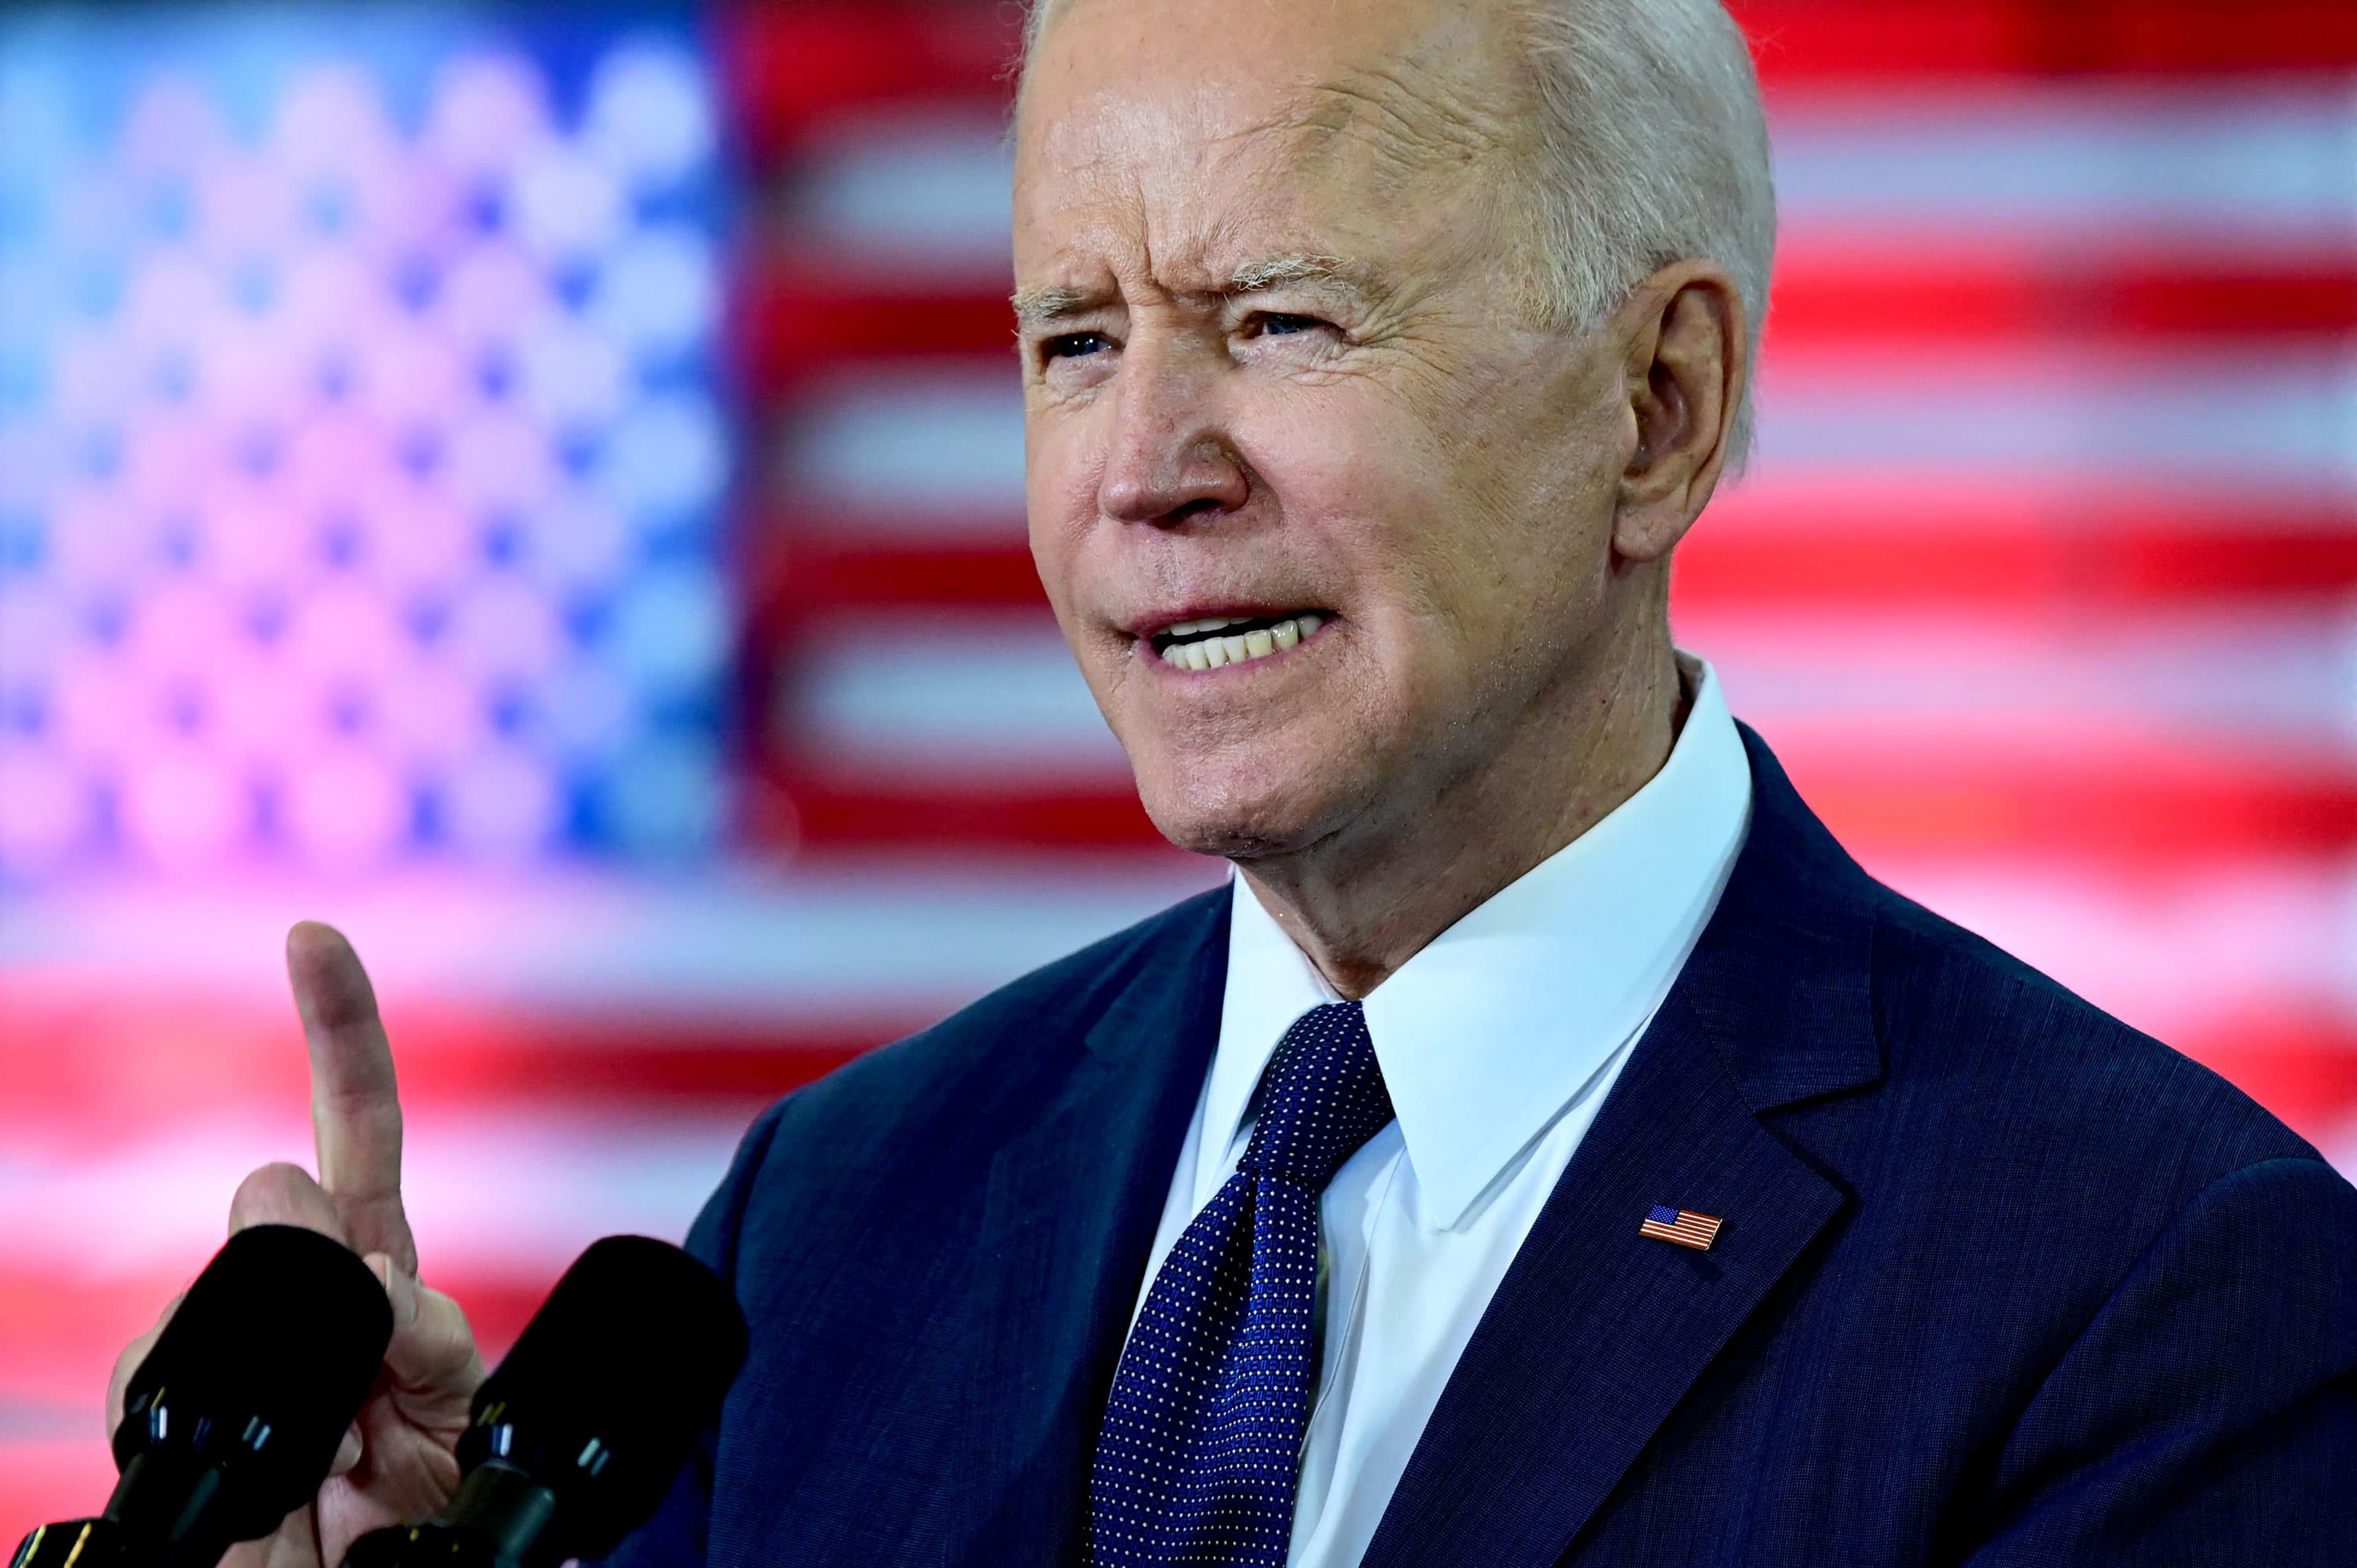 Biden corporate tax hike would have little impact on business investment, Wharton study says